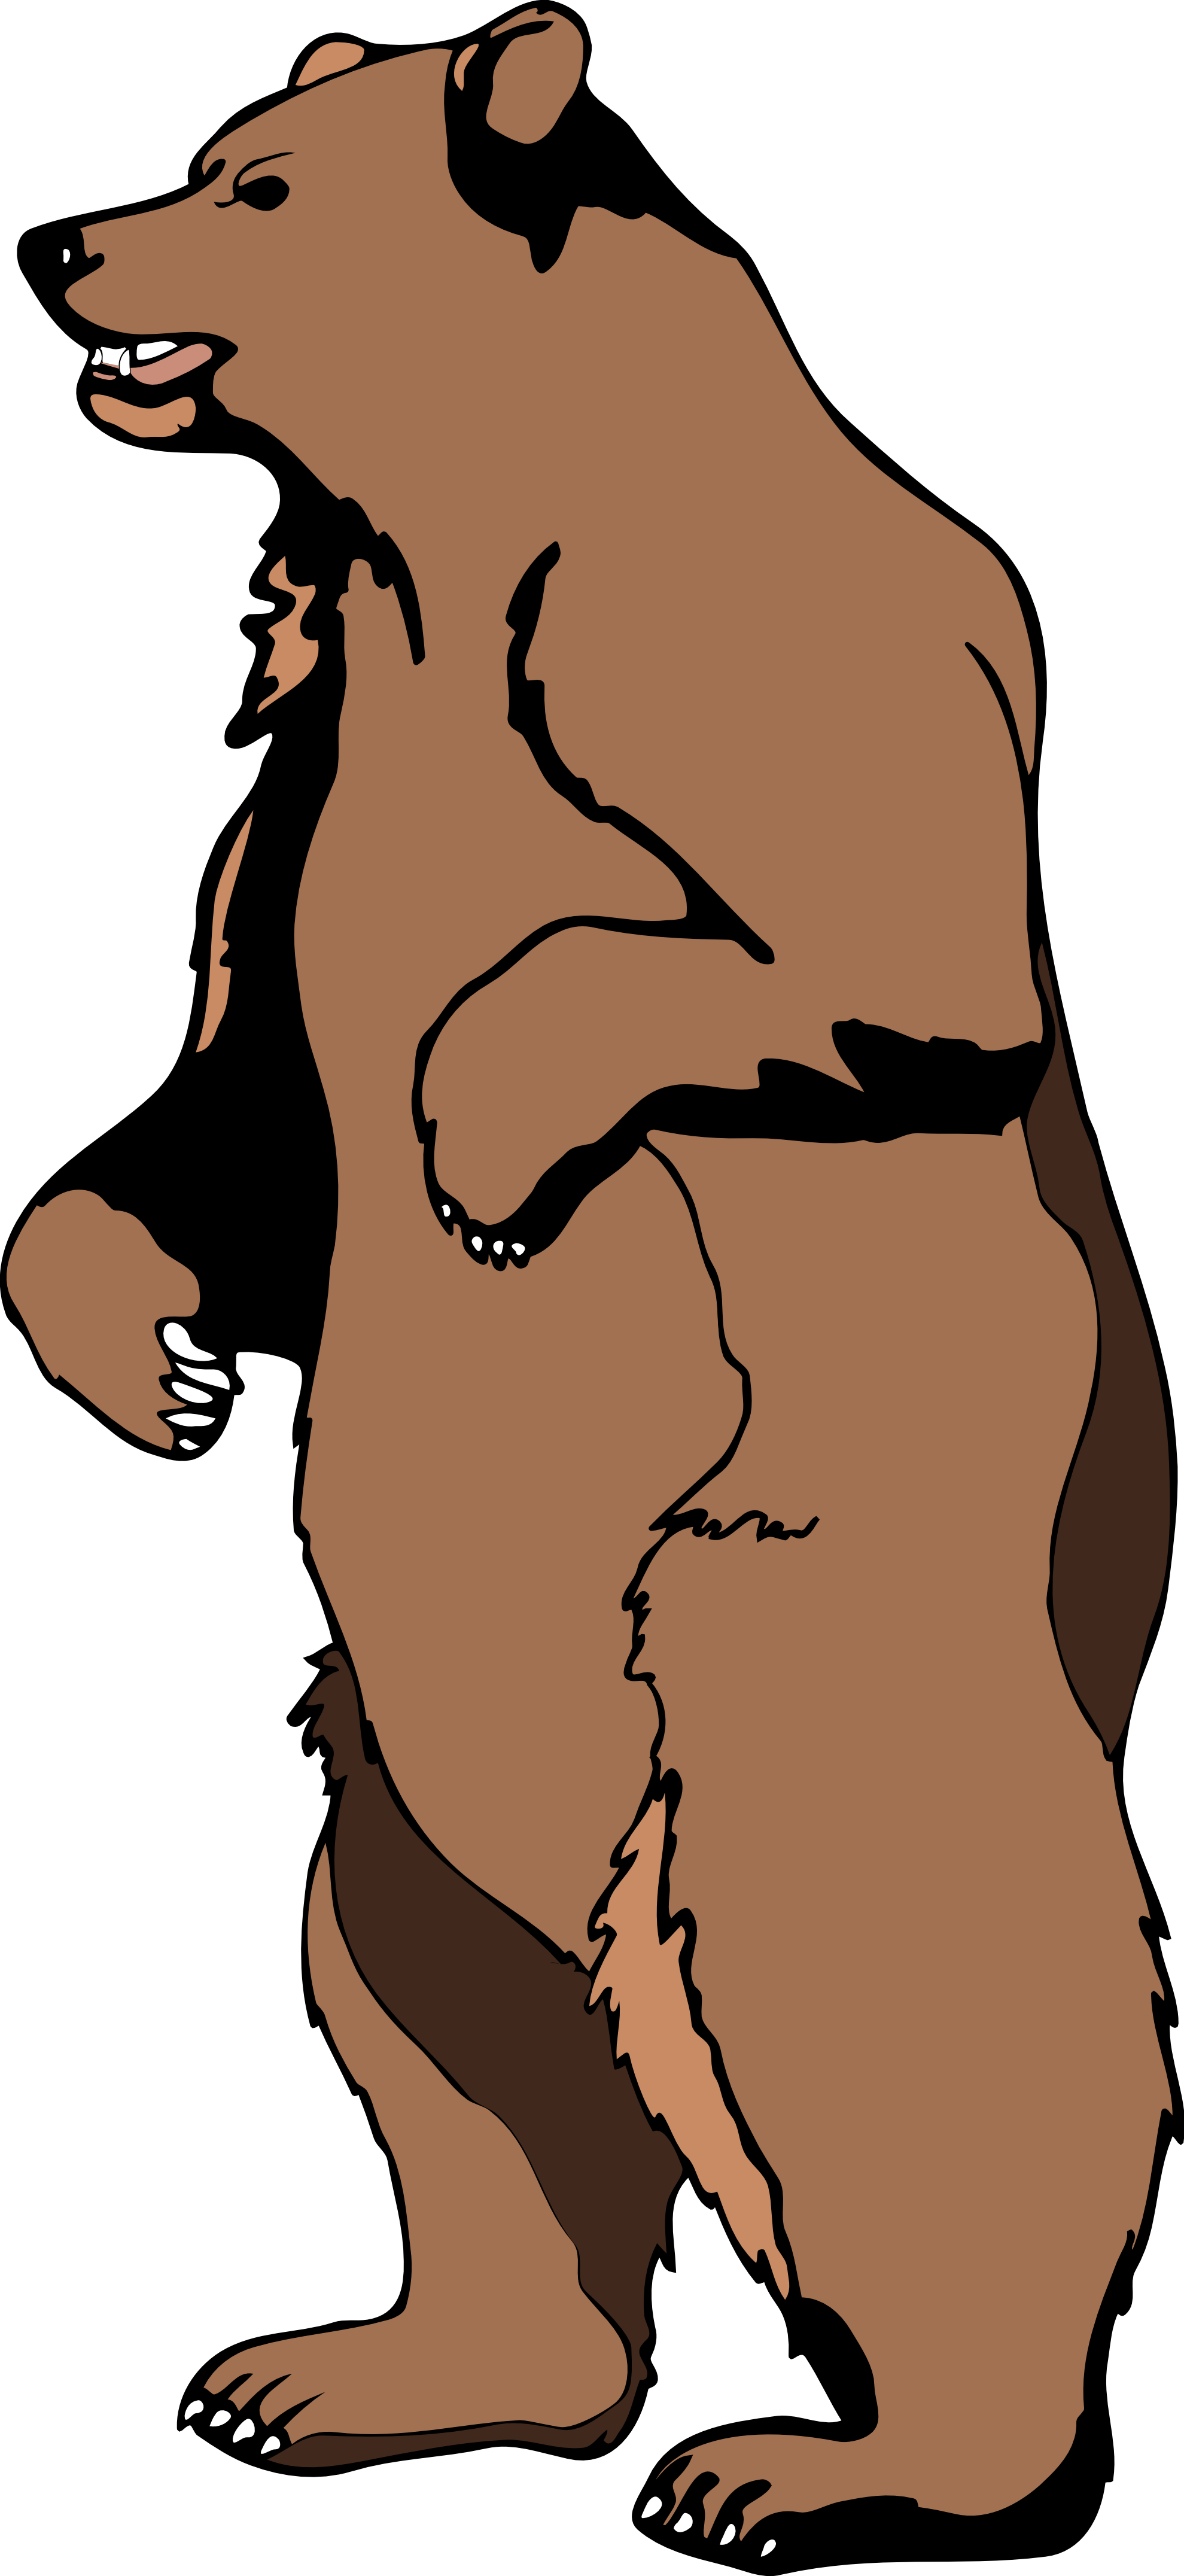 Grizzly Bear Standing Clipart | Clipart Panda - Free Clipart Images